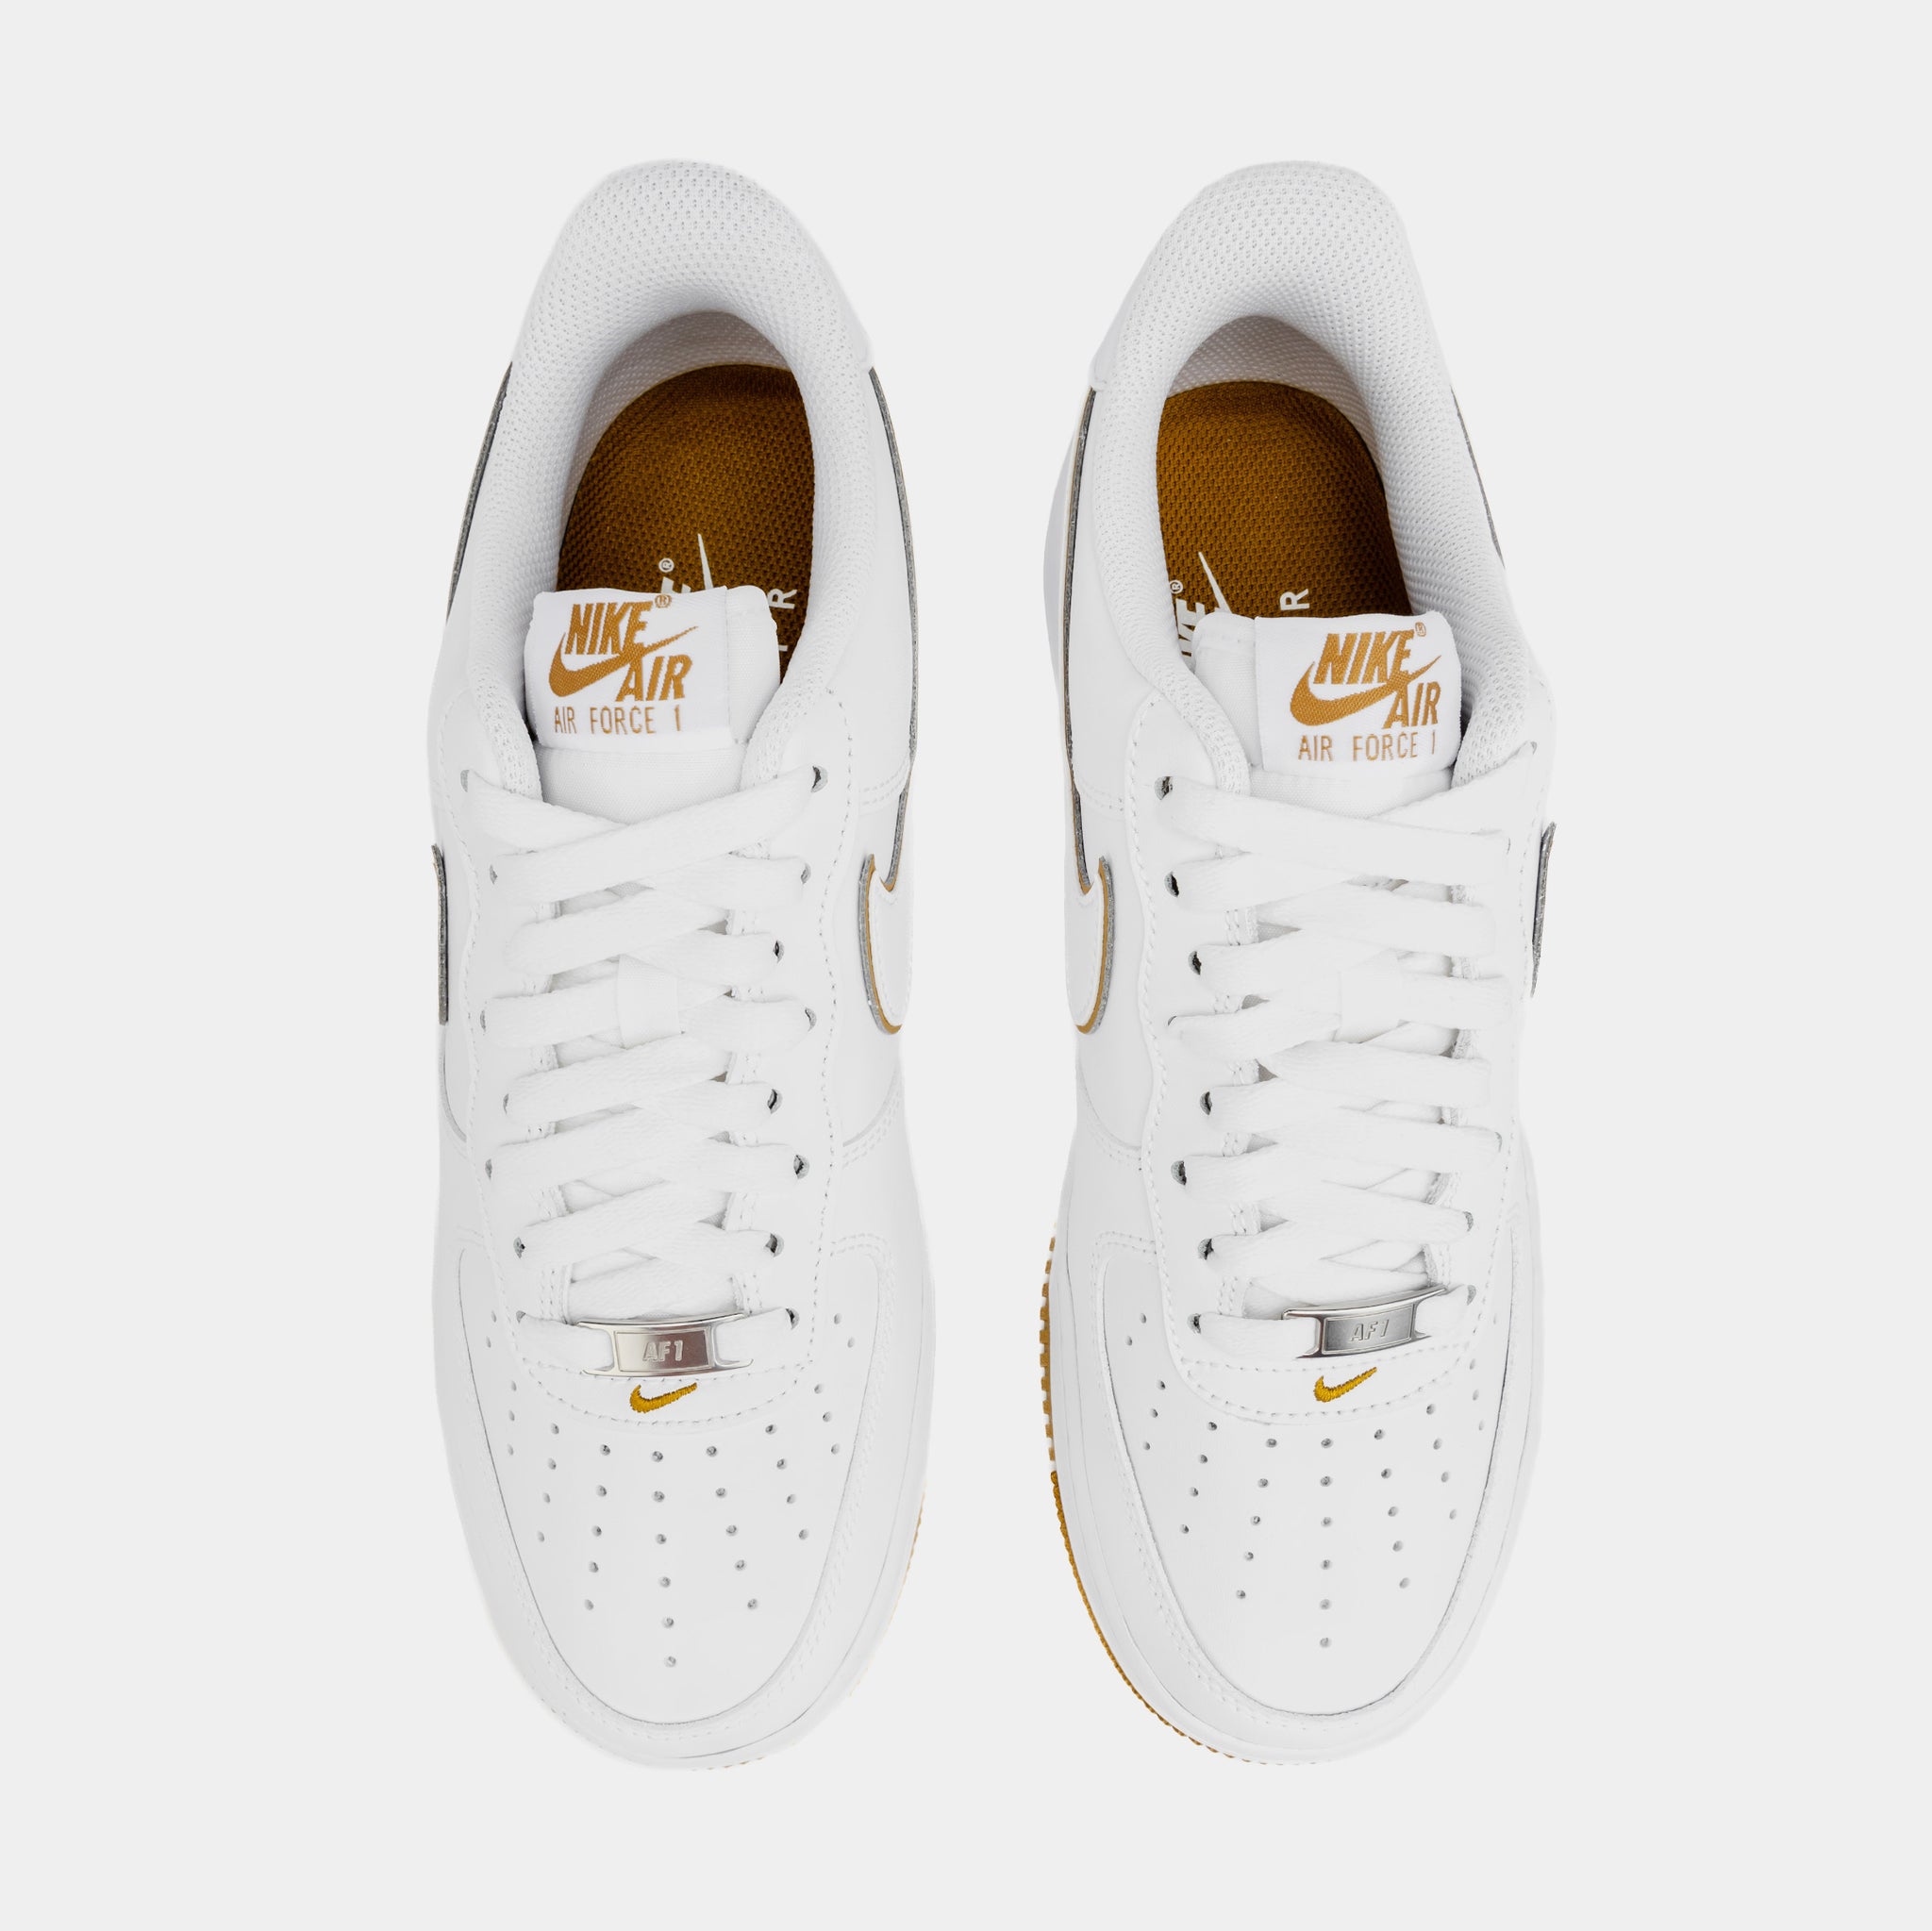 Air Force 1 '07 Low Mens Lifestyle Shoes (White/Bronzine)